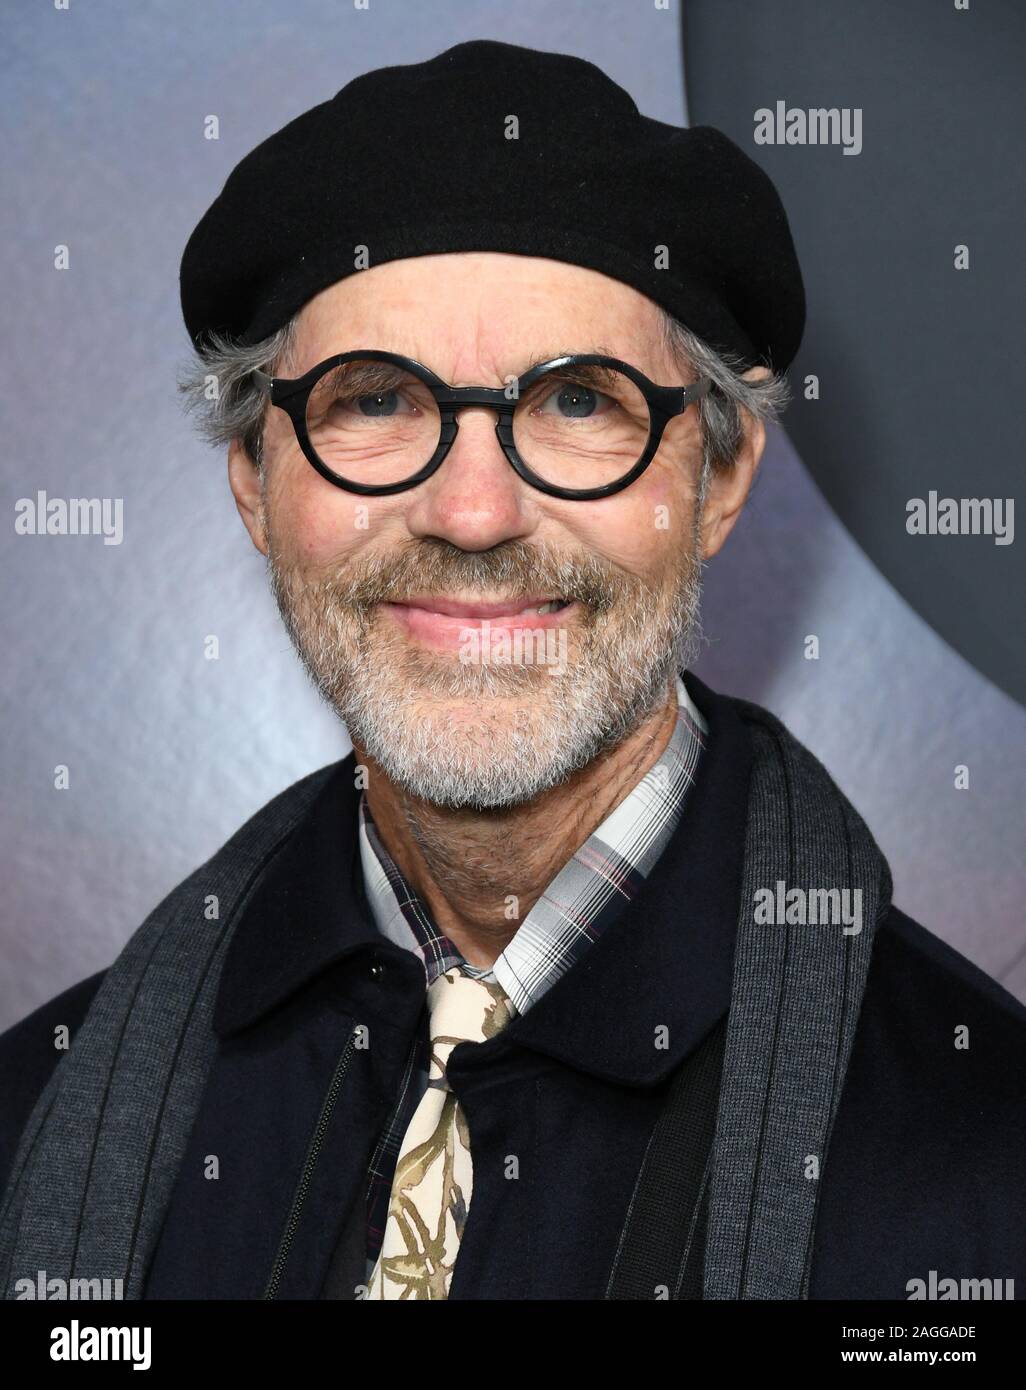 Los Angeles, USA . 18 December 2019 - Hollywood, California - Dennis Gassner. Universal Pictures' '1917' Los Angeles Premiere held at TCL Chinese Theatre. Photo Credit: Birdie Thompson/AdMedia /MediaPunch Credit: MediaPunch Inc/Alamy Live News Stock Photo